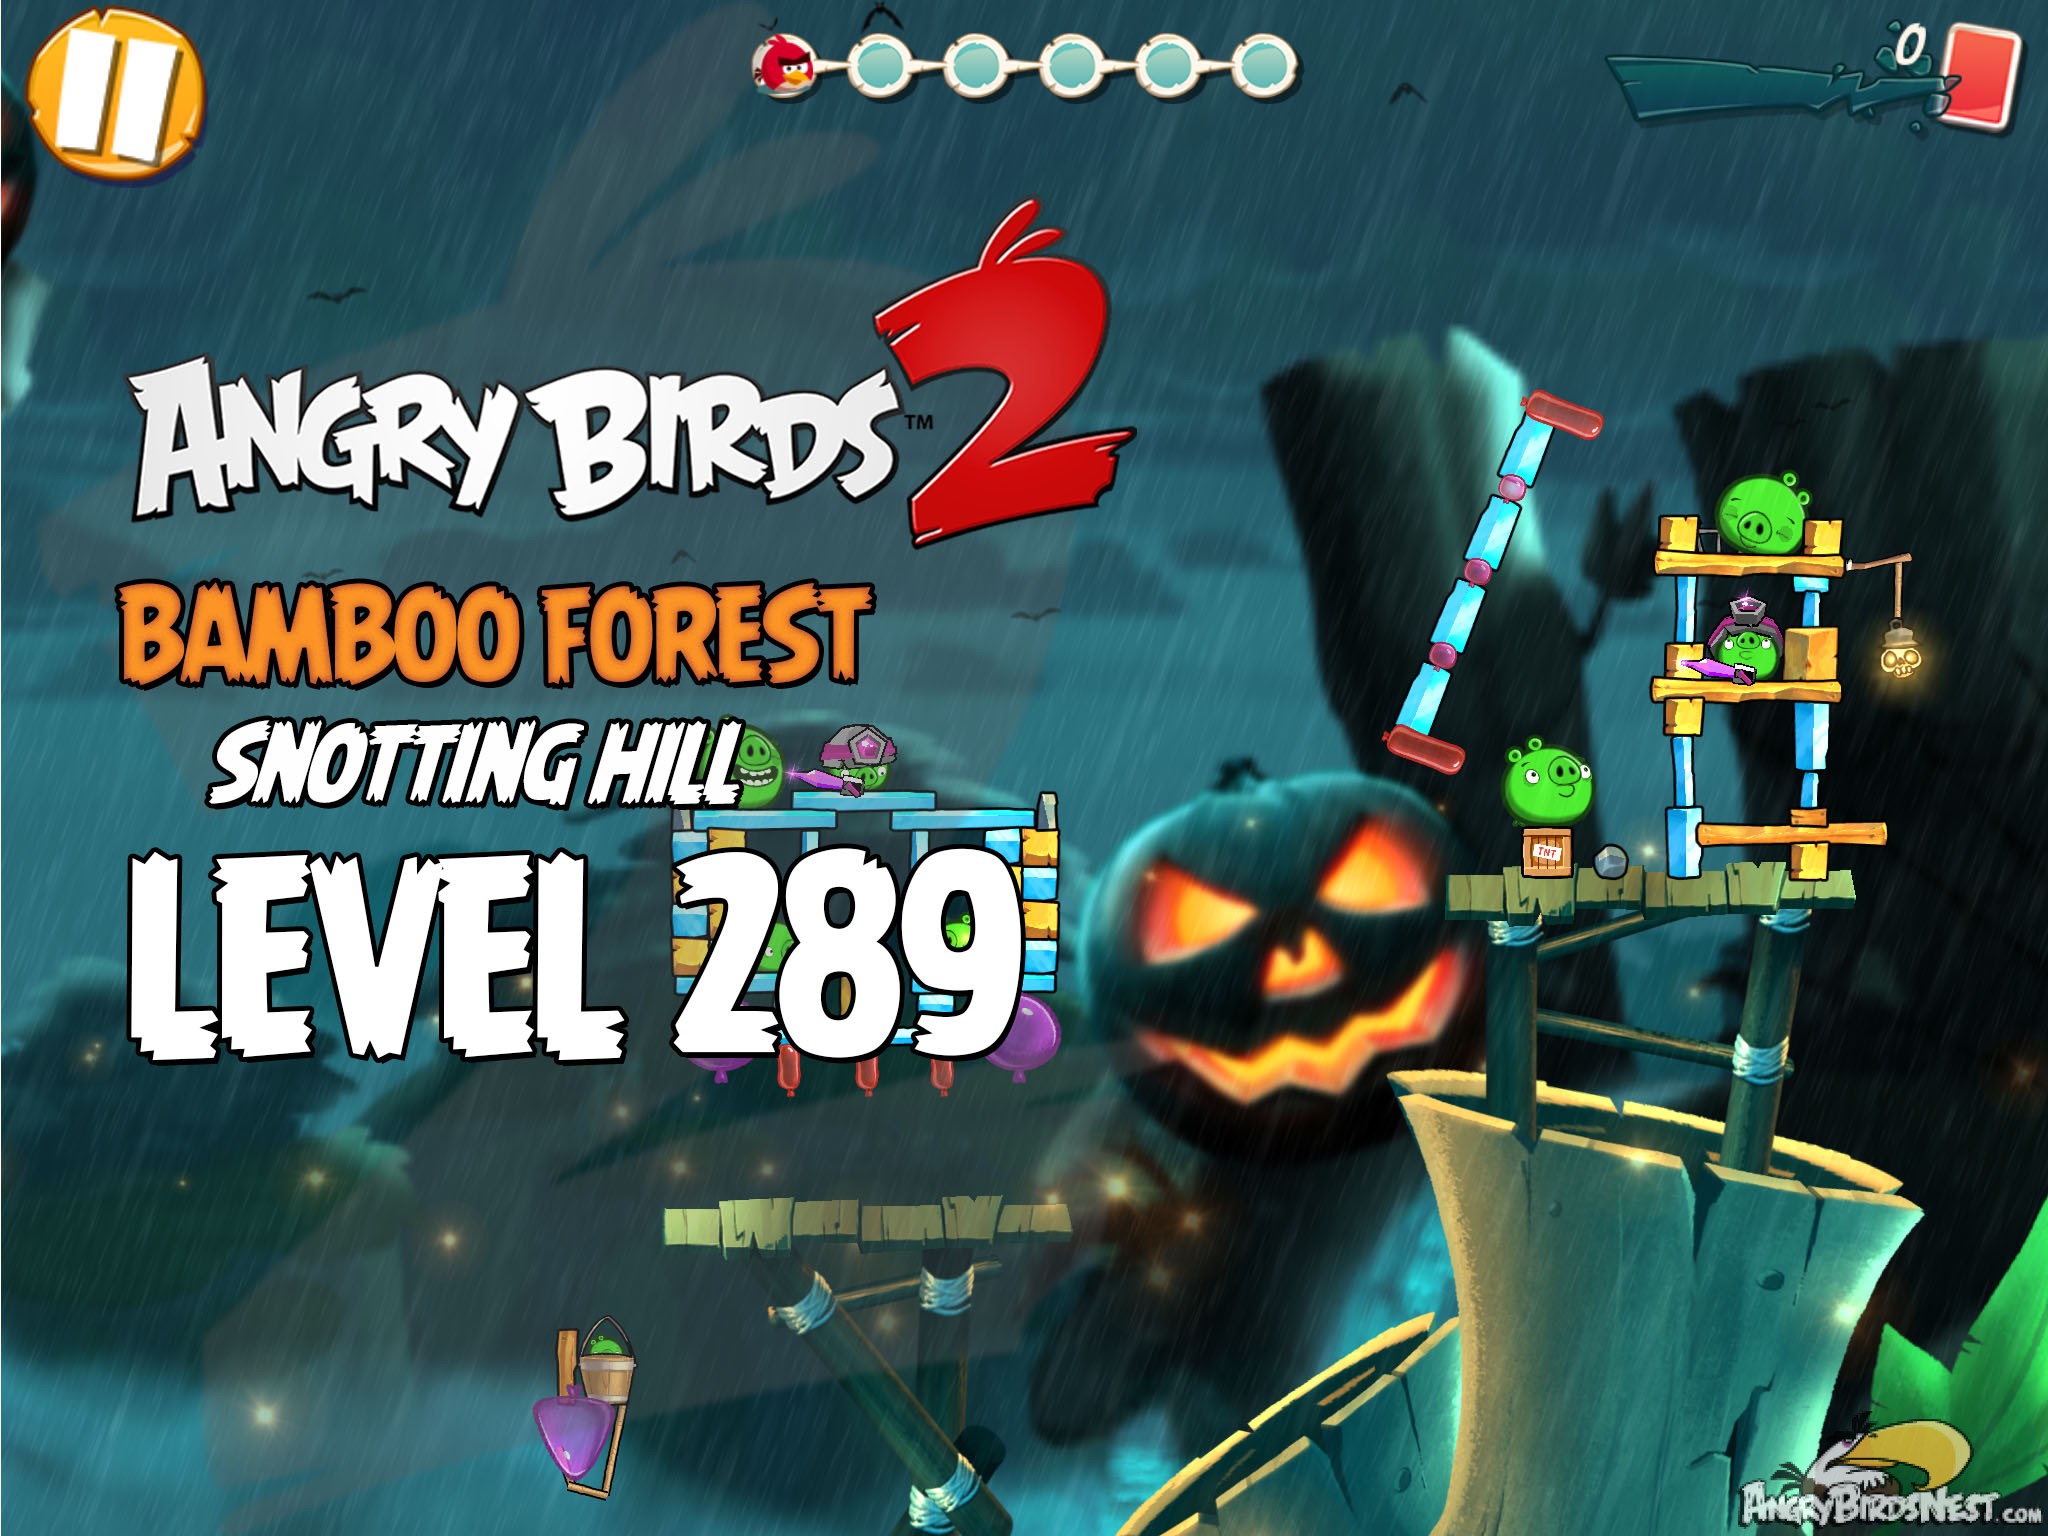 Angry Birds 2 Bambbo Forest Snotting Hill Level 289